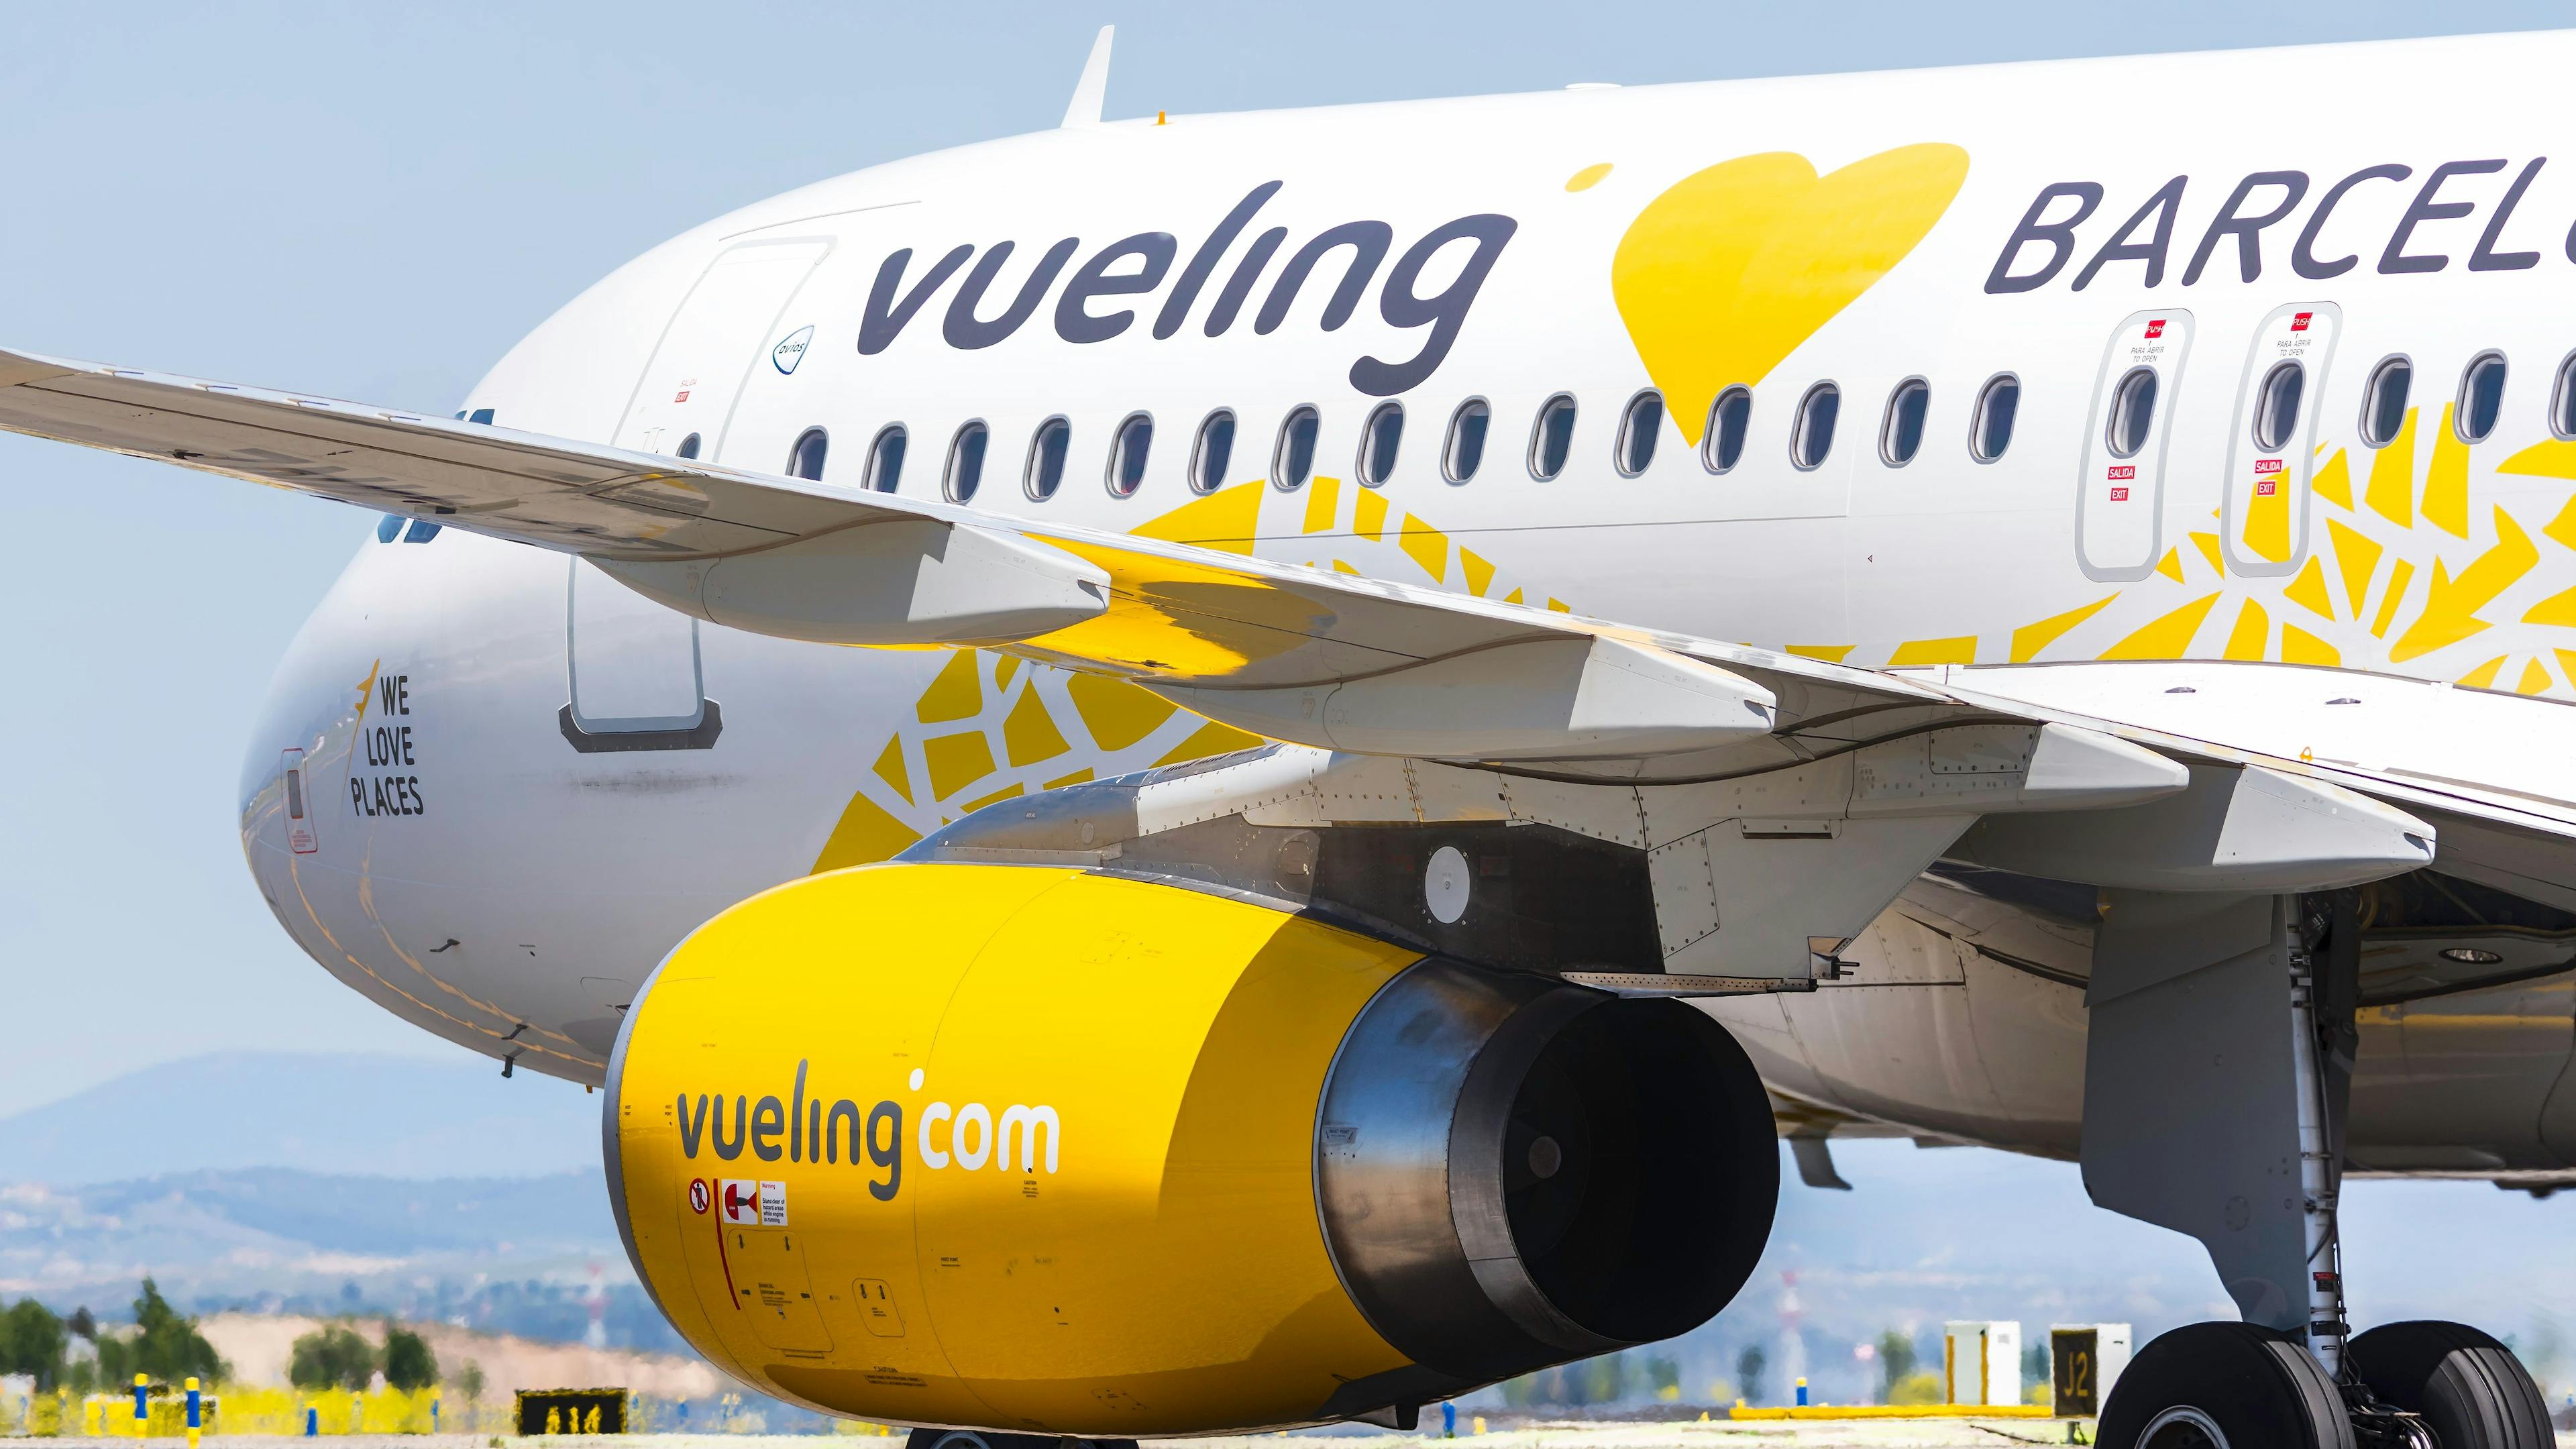 Europe’s Budget-Friendly Airlines You Need to Know - Vueling airlines -Spain - low-budget airlines - ratepunk